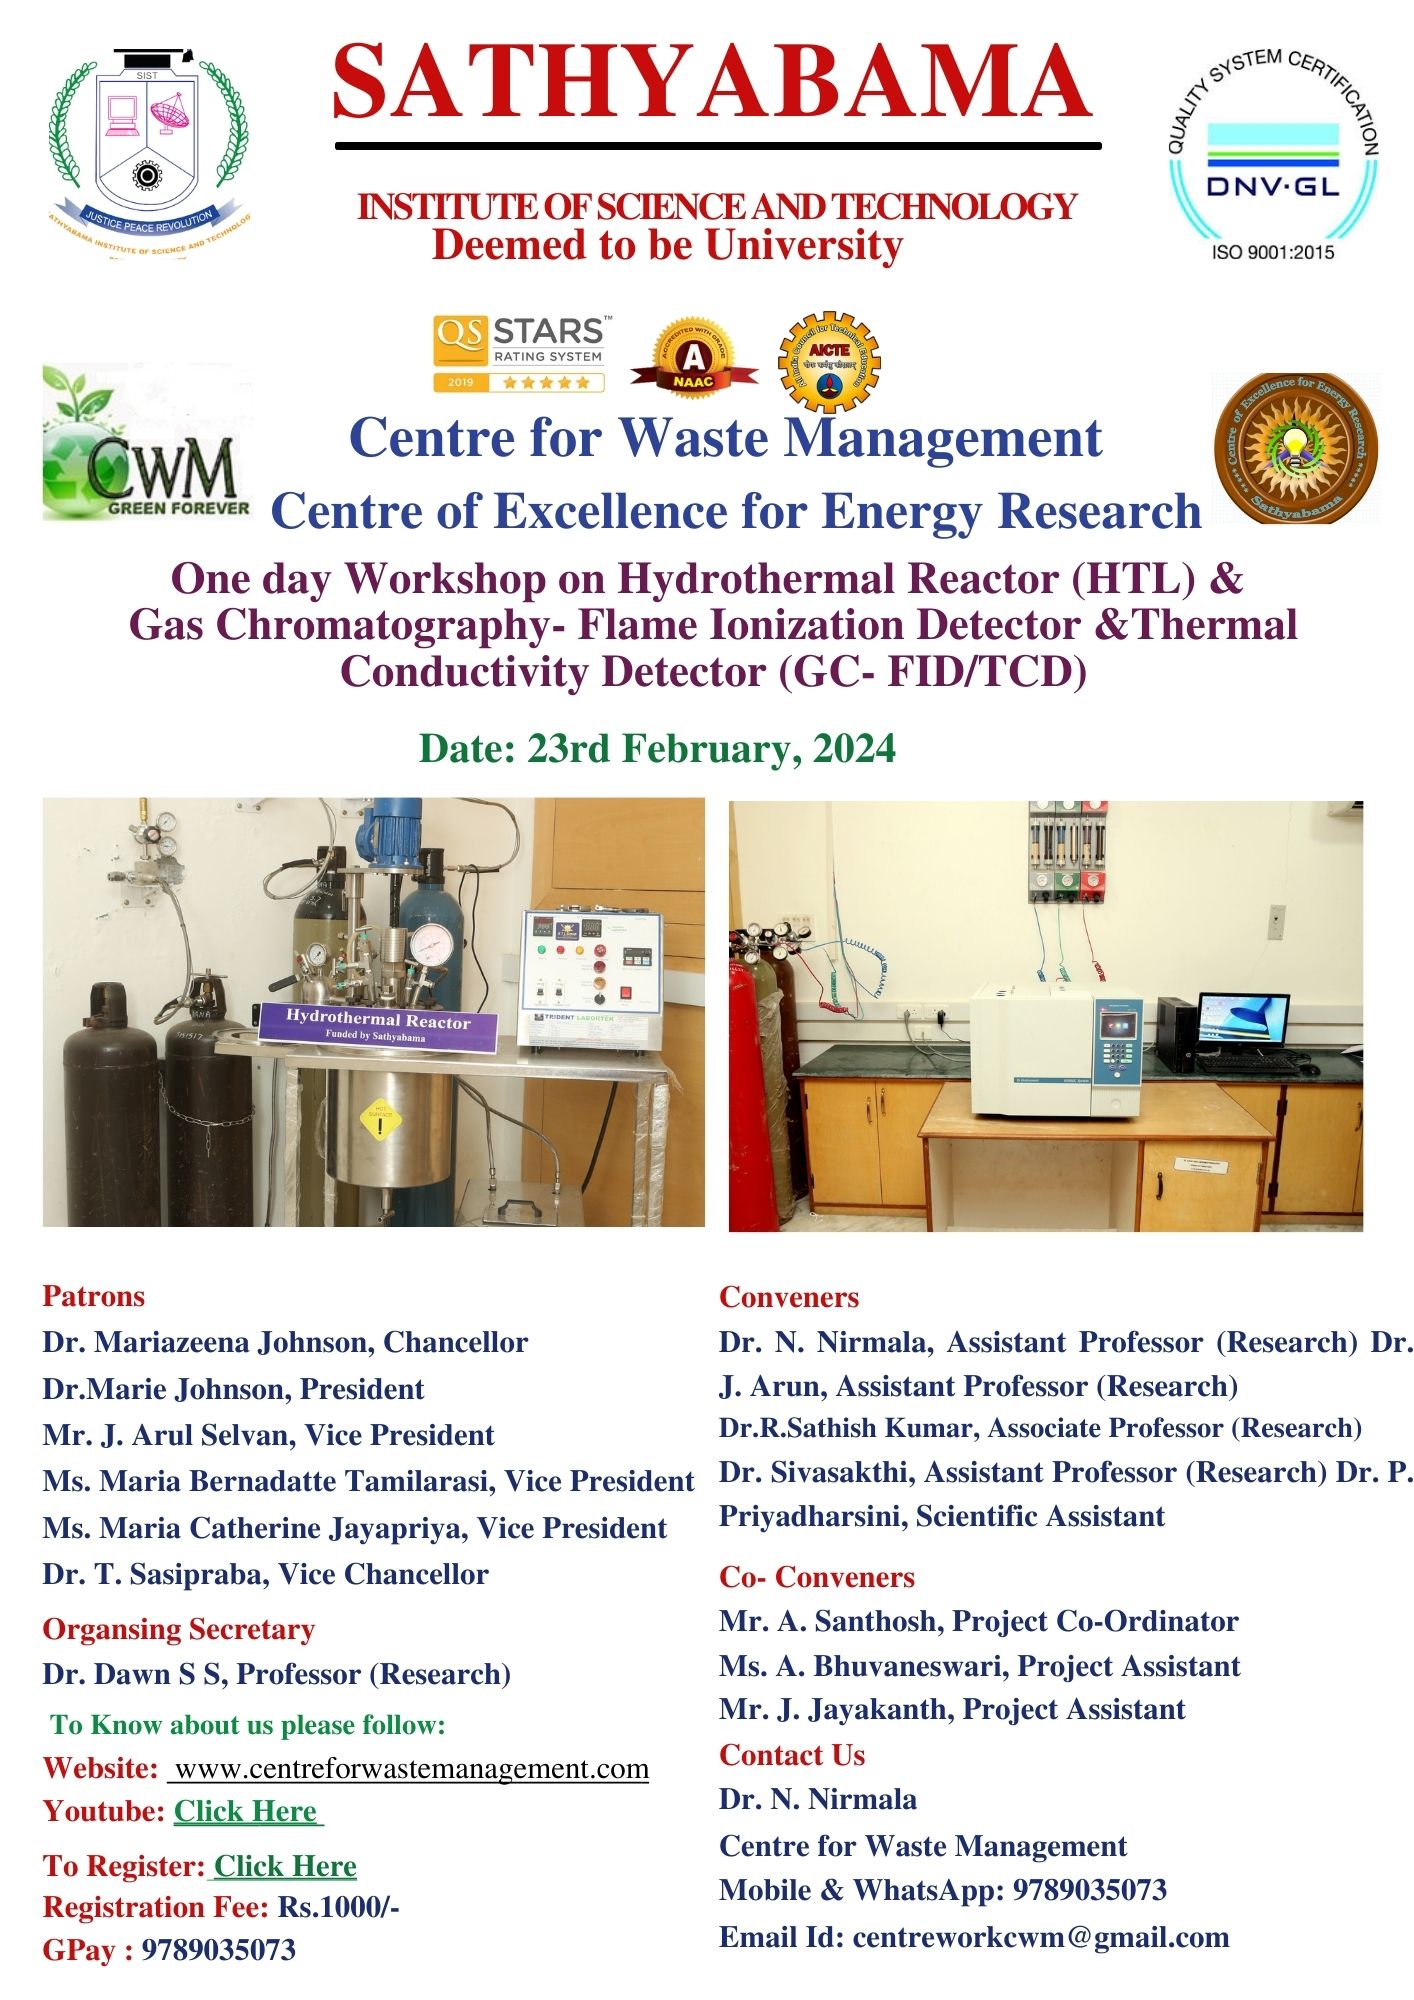 One day Workshop on Hydrothermal Reactor (HTL) and Gas Chromatography- Flame Ionization Detector and Thermal Conductivity Detector (GC- FID/TCD) 2024